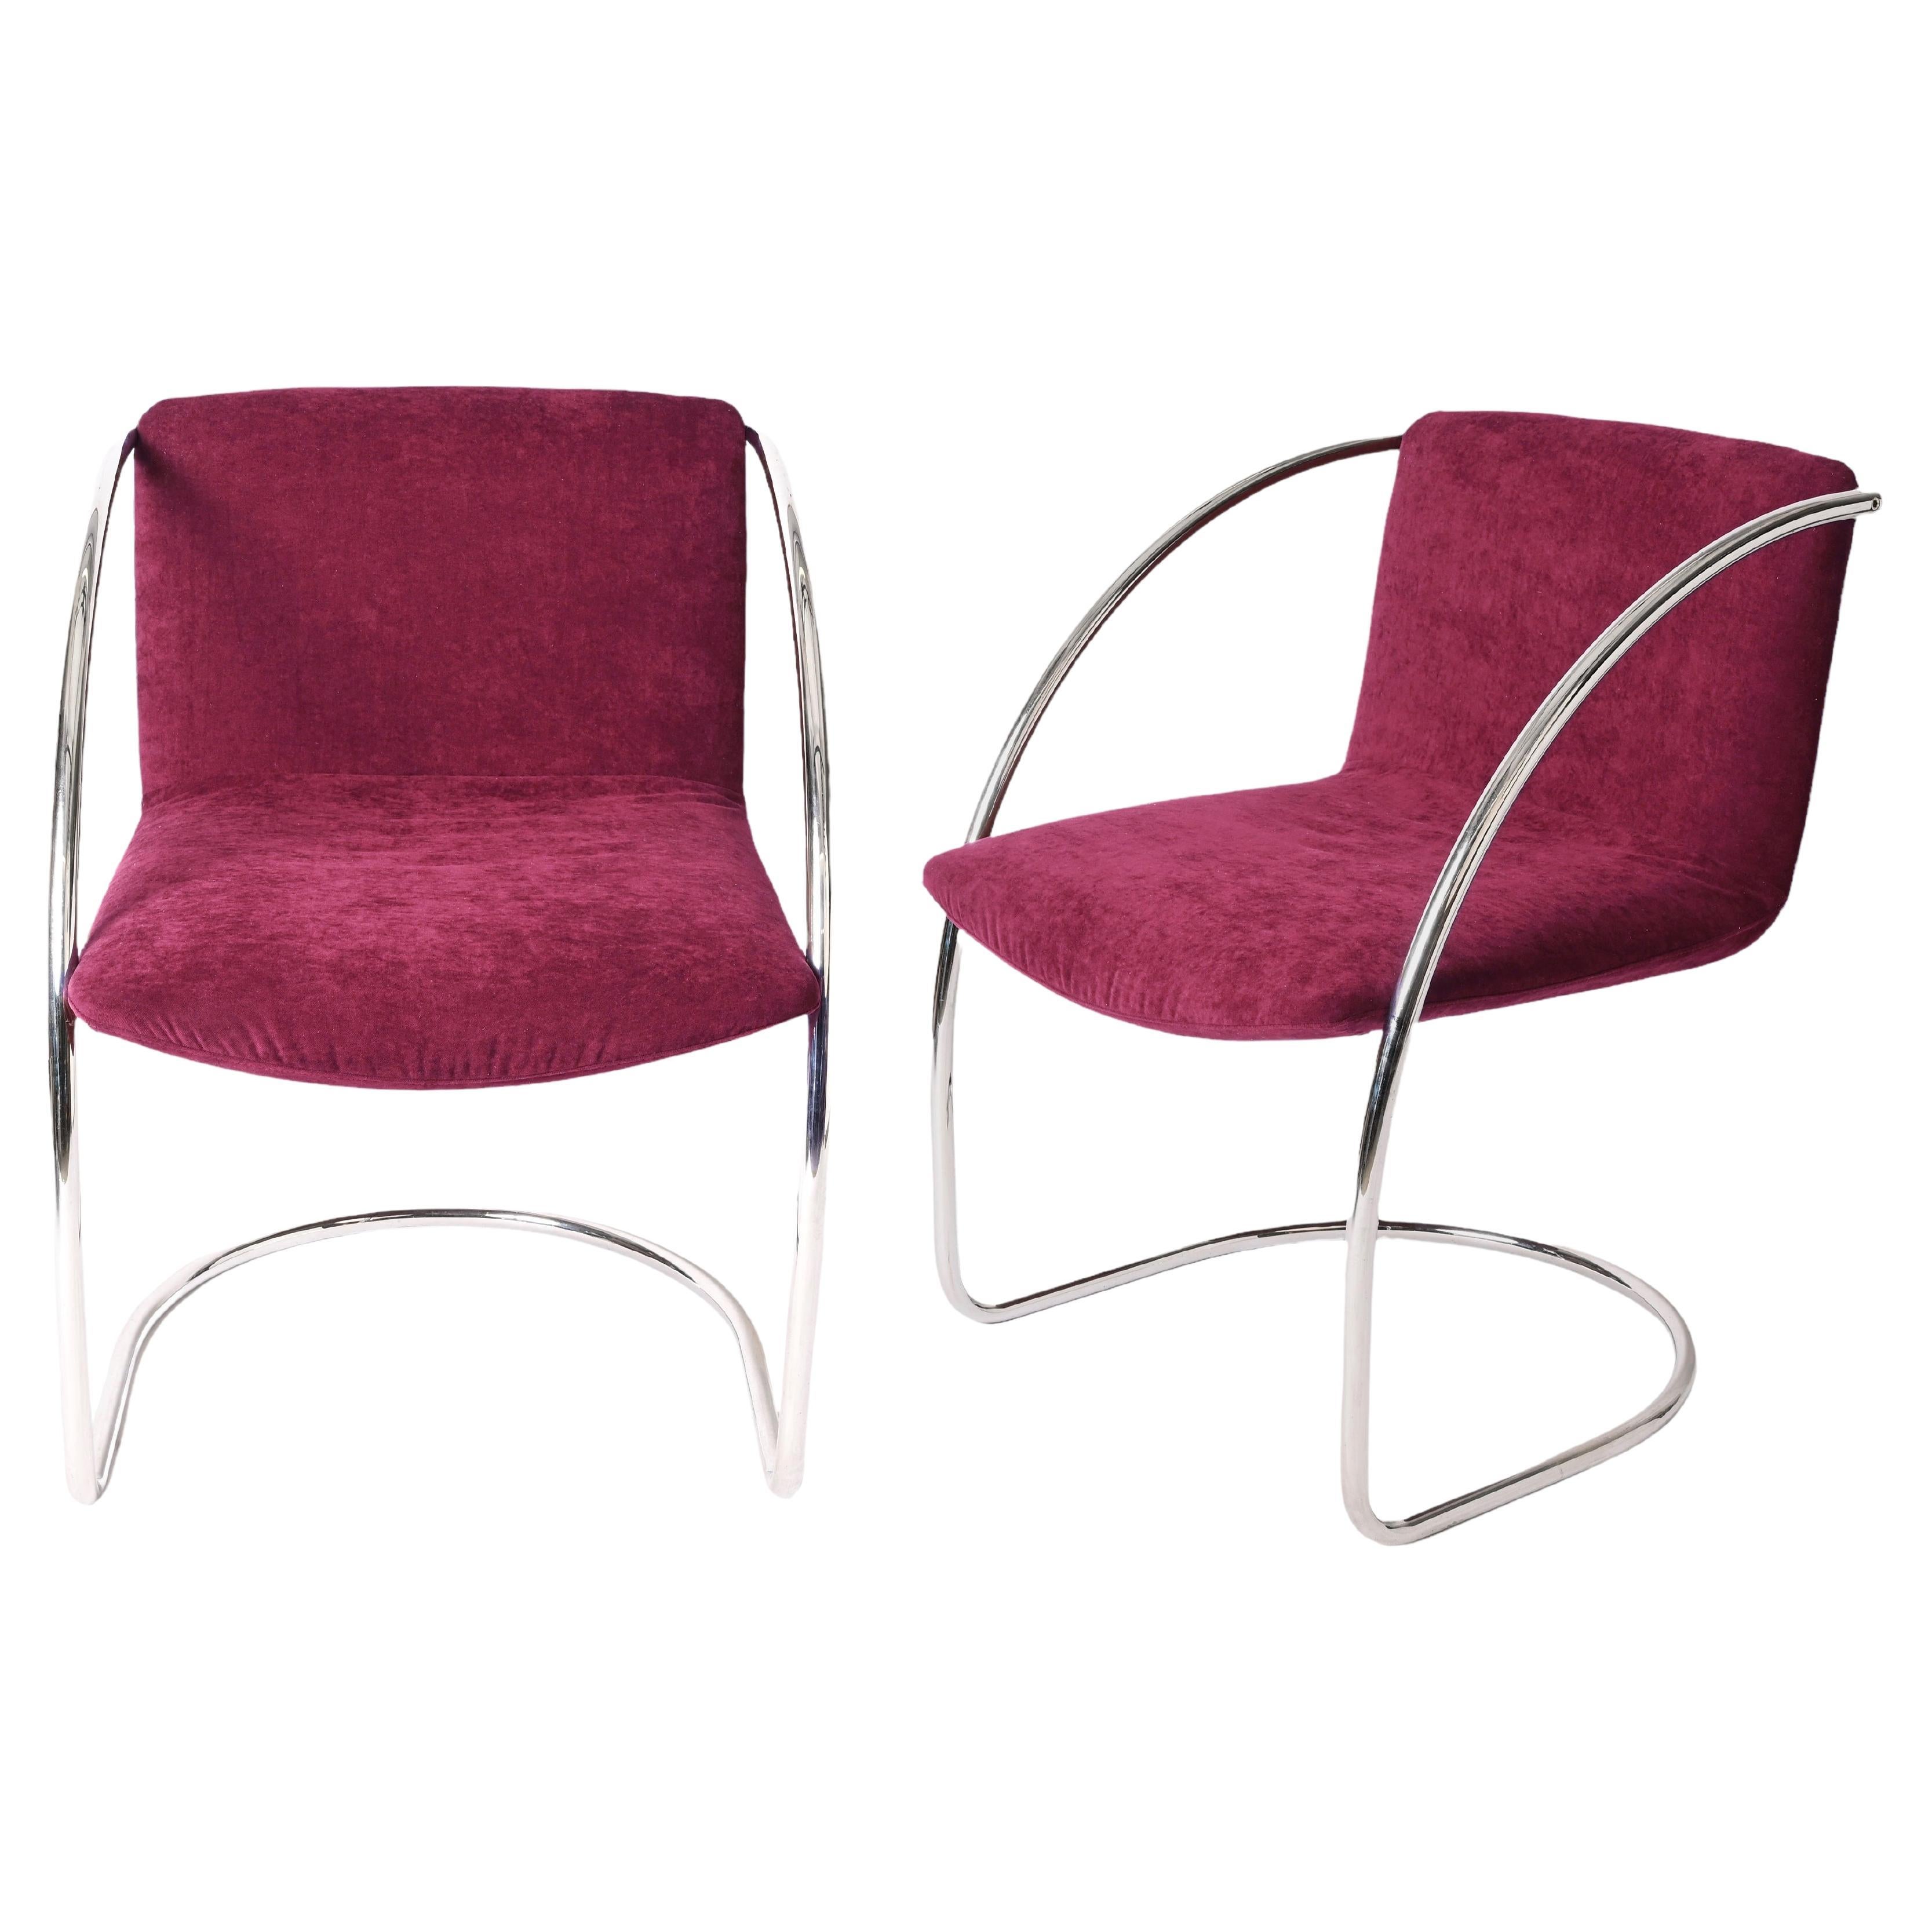 Pair of "Lens" Chairs by G. Offredi Plum Velvet and Chrome, Saporiti Italy 1968